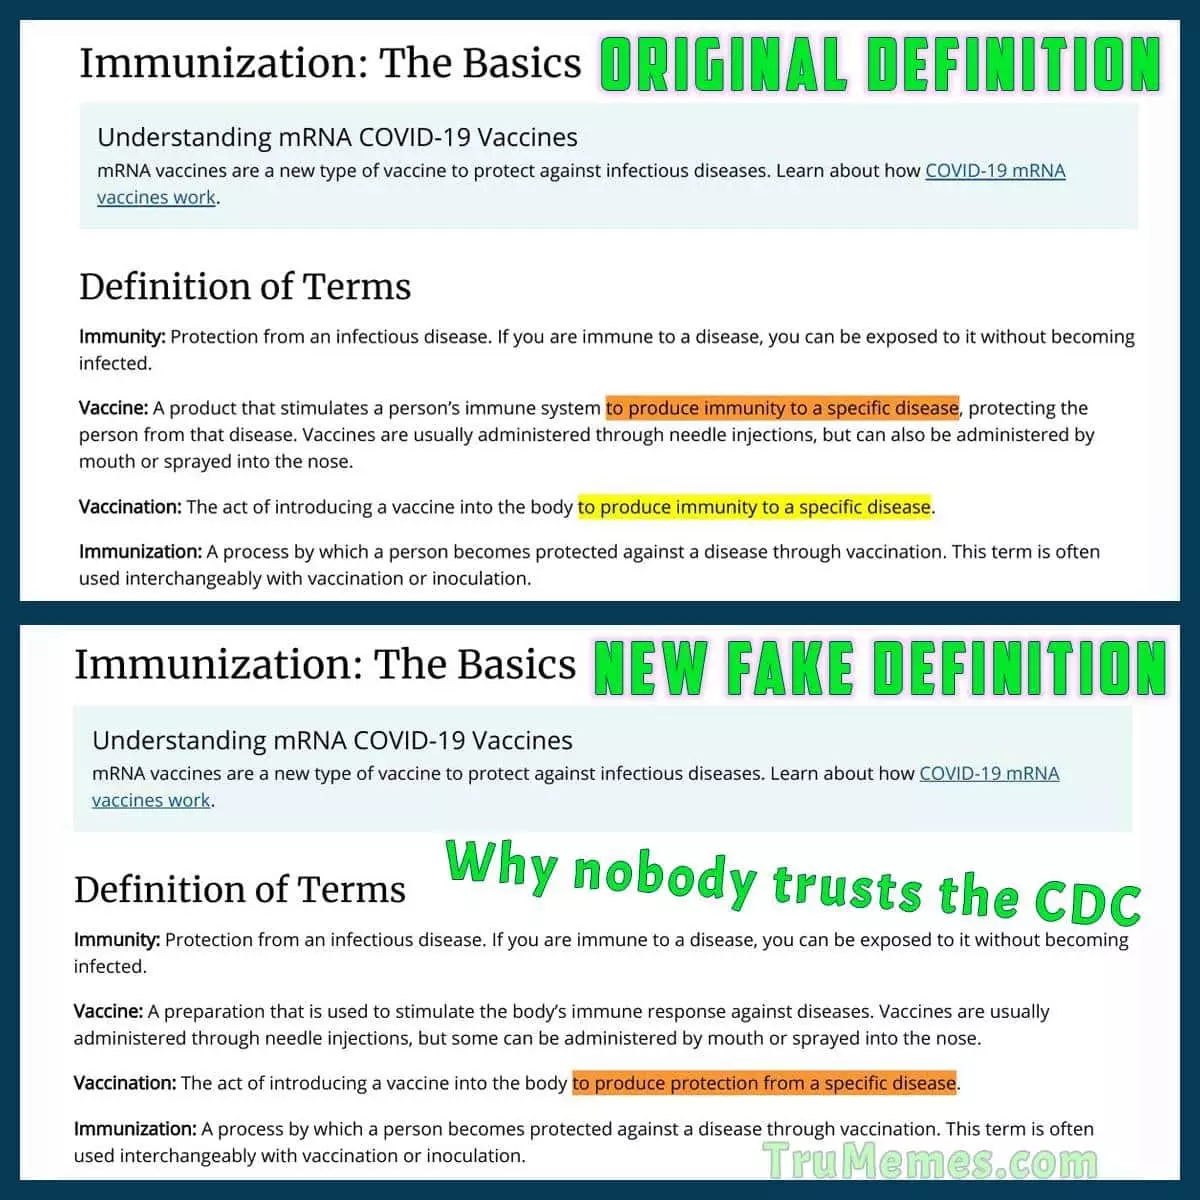 CDC Redefines Immunity and Vaccine